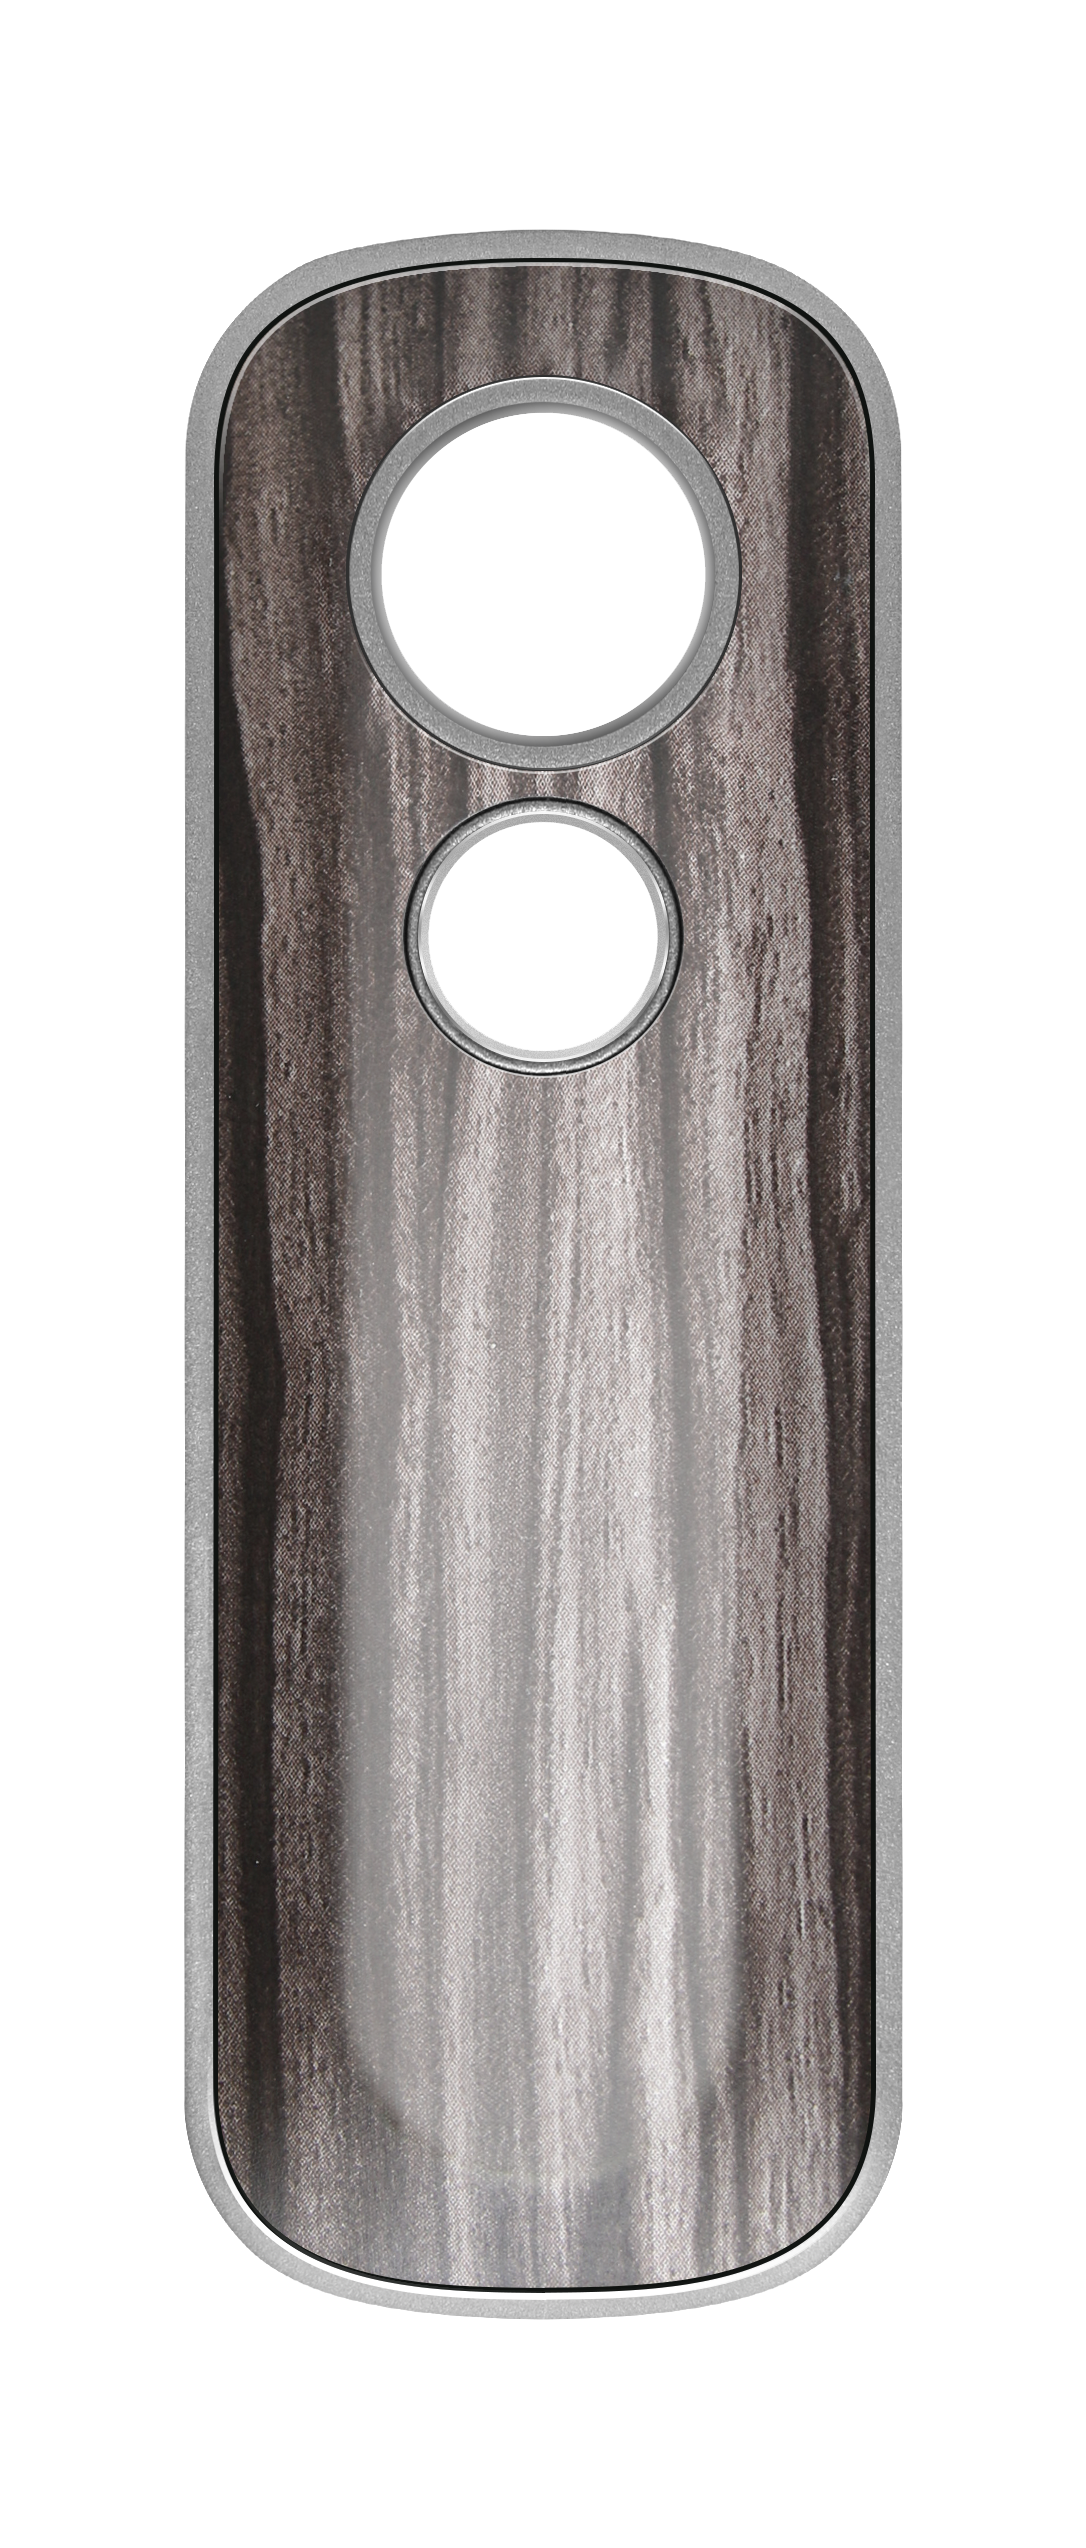 Firefly 2+ Top Lid Vaporizers : Portable Parts Firefly zebrawood  